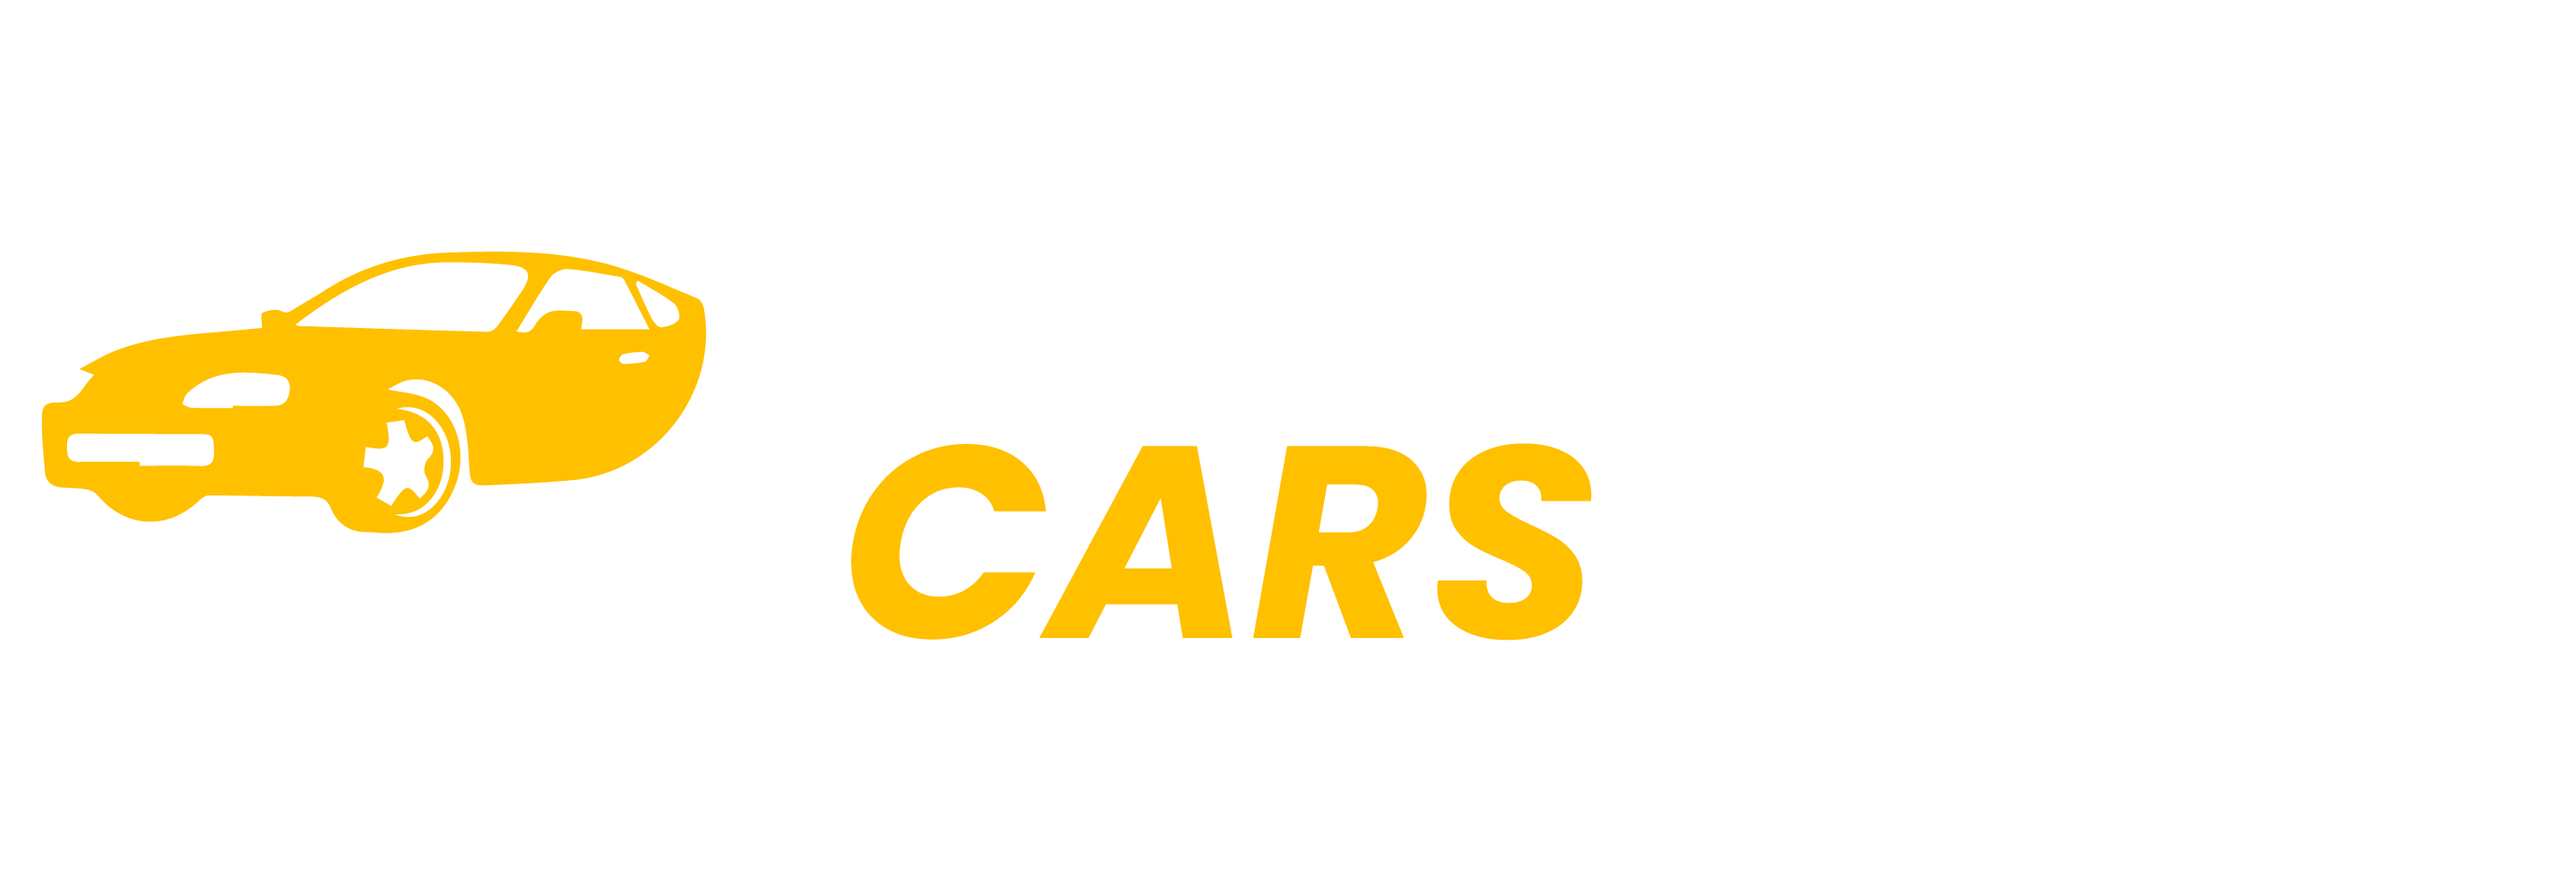 Luxe Drive Cars